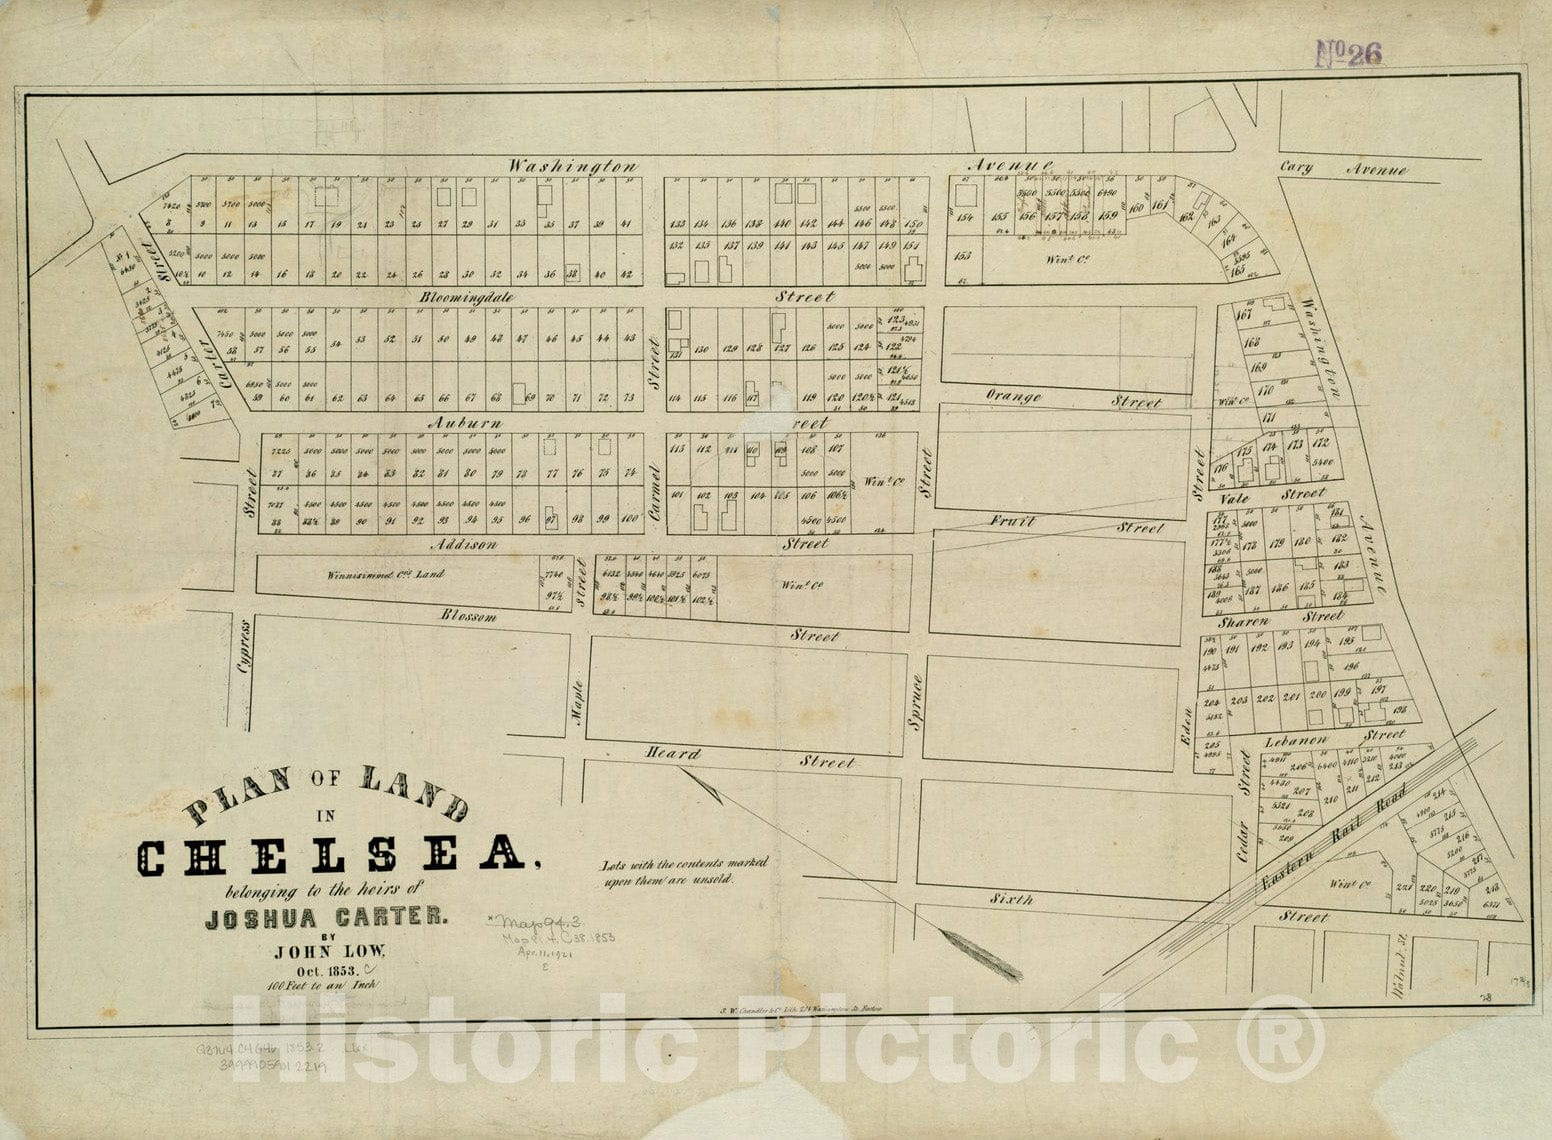 Historical Map, 1853 Plan of Land in Chelsea Belonging to The heirs of Joshua Carter, Vintage Wall Art